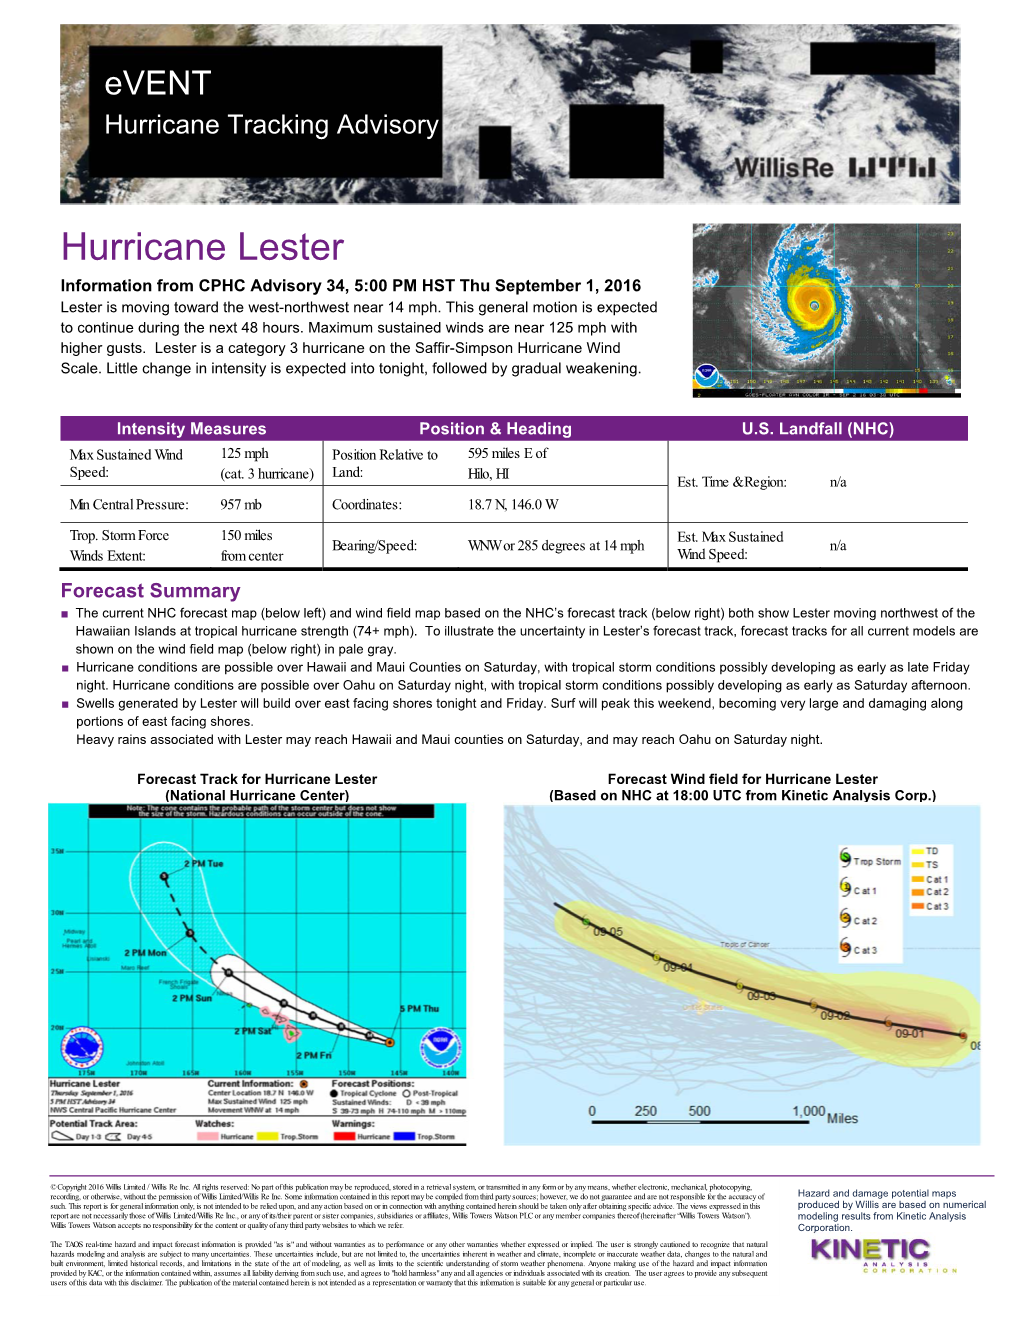 Hurricane Lester Information from CPHC Advisory 34, 5:00 PM HST Thu September 1, 2016 Lester Is Moving Toward the West-Northwest Near 14 Mph